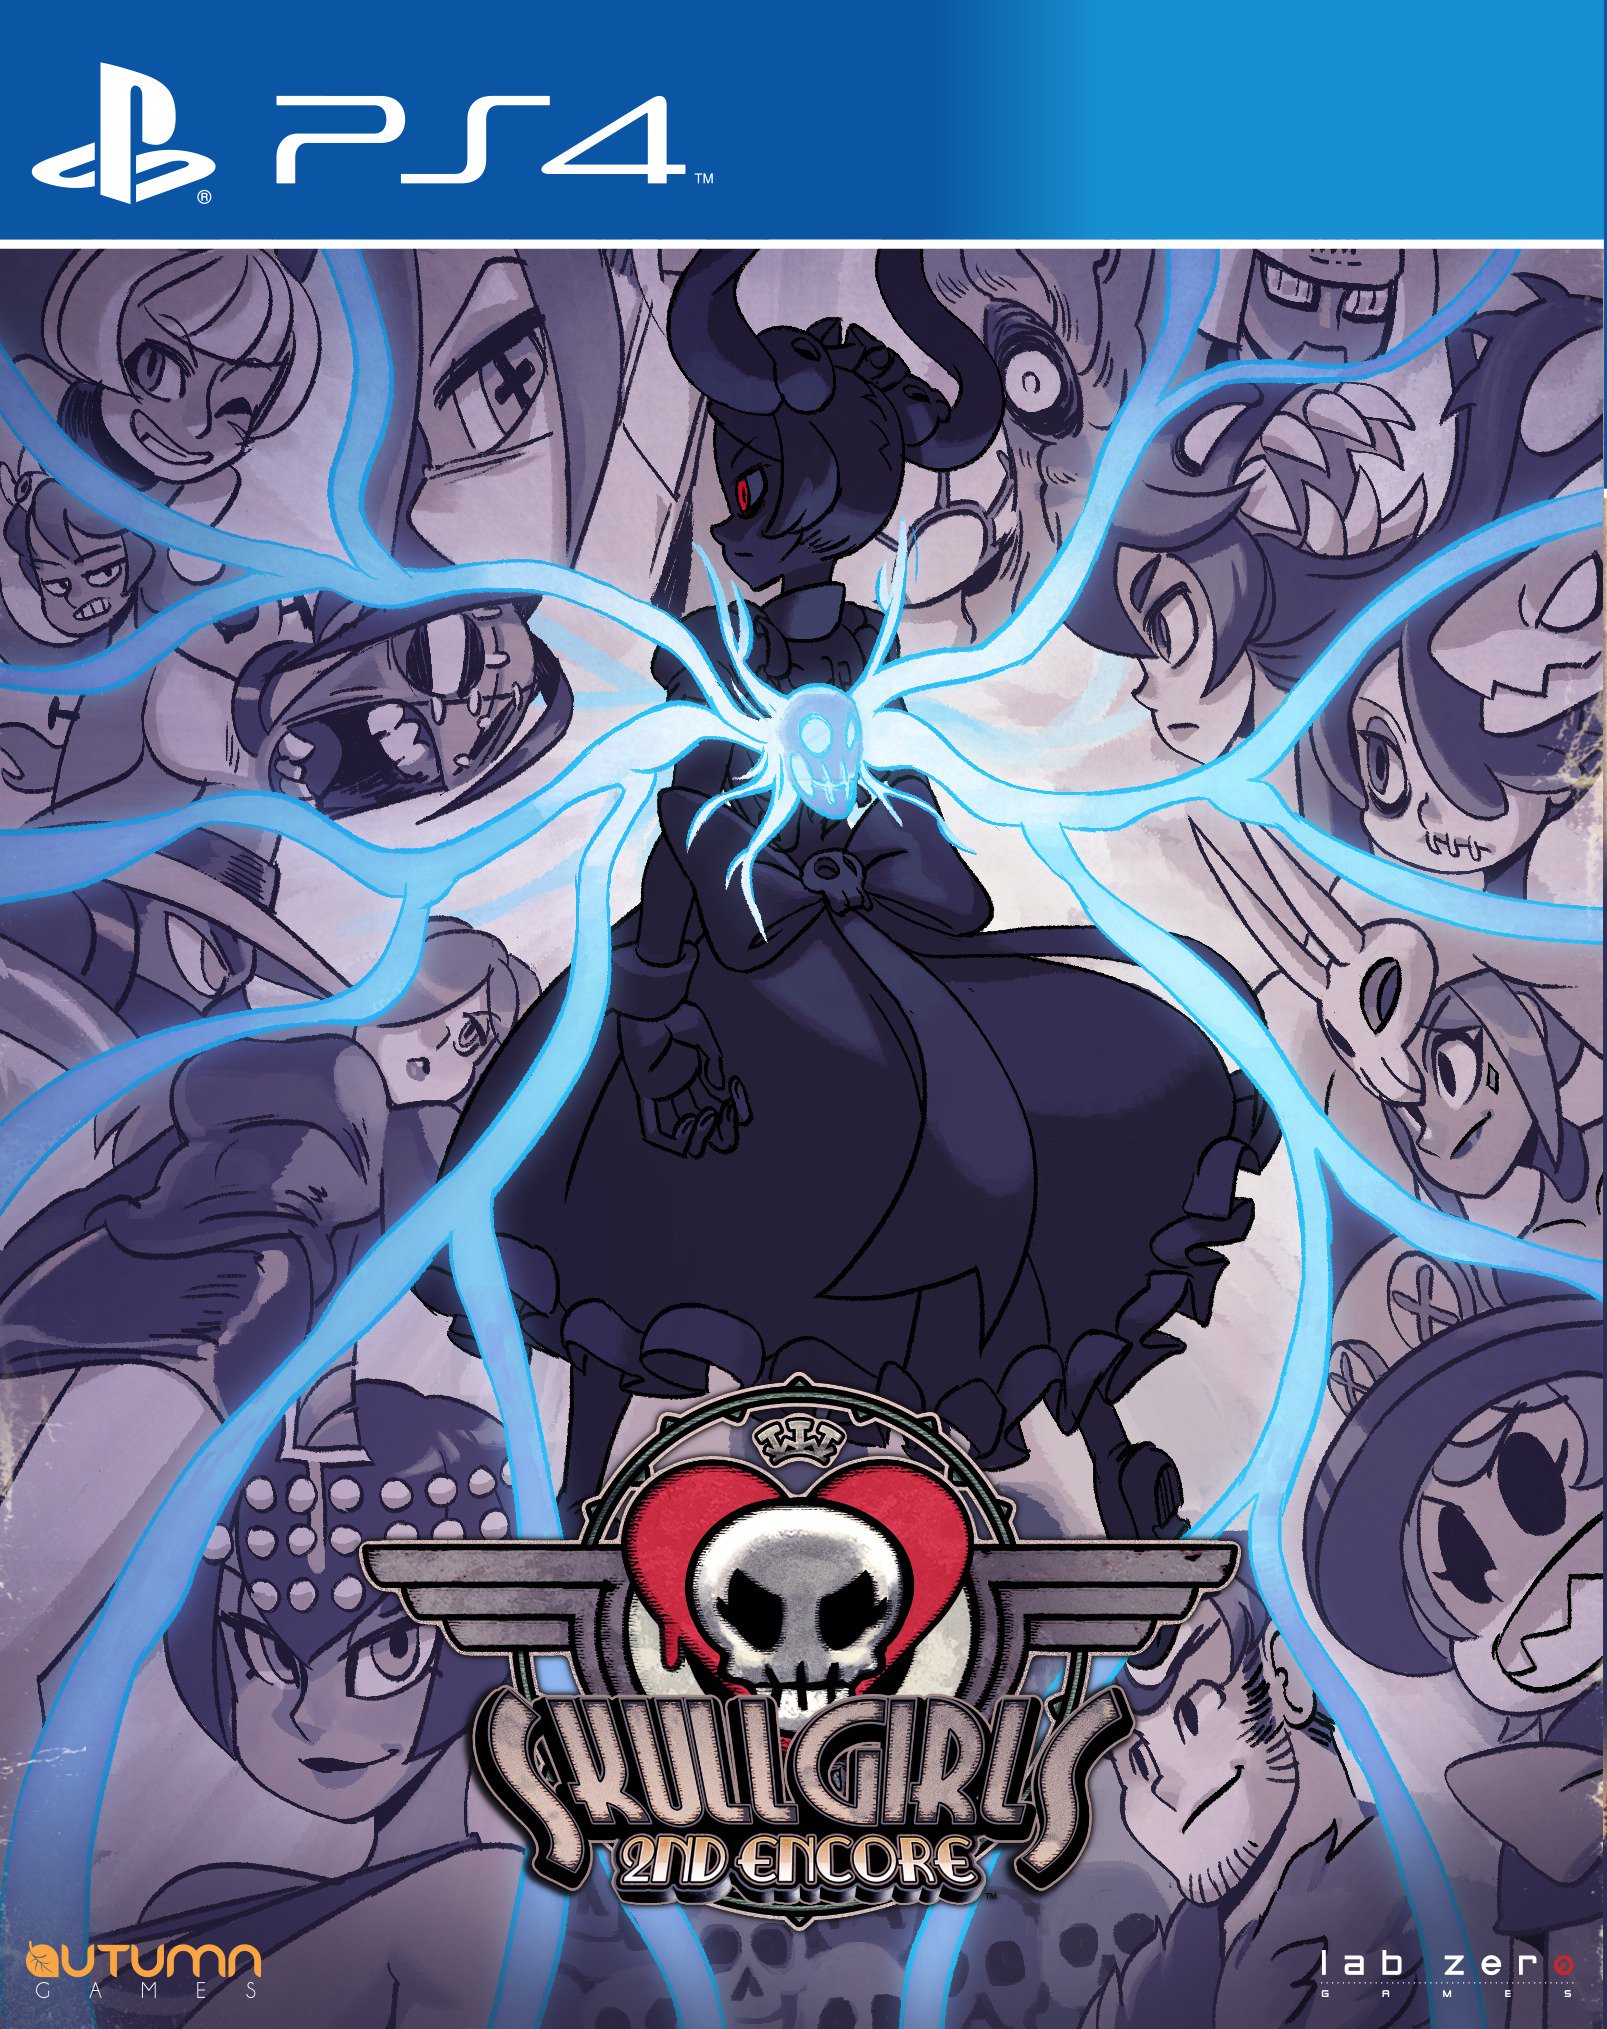 Skullgirls 2nd Encore download the new version for windows